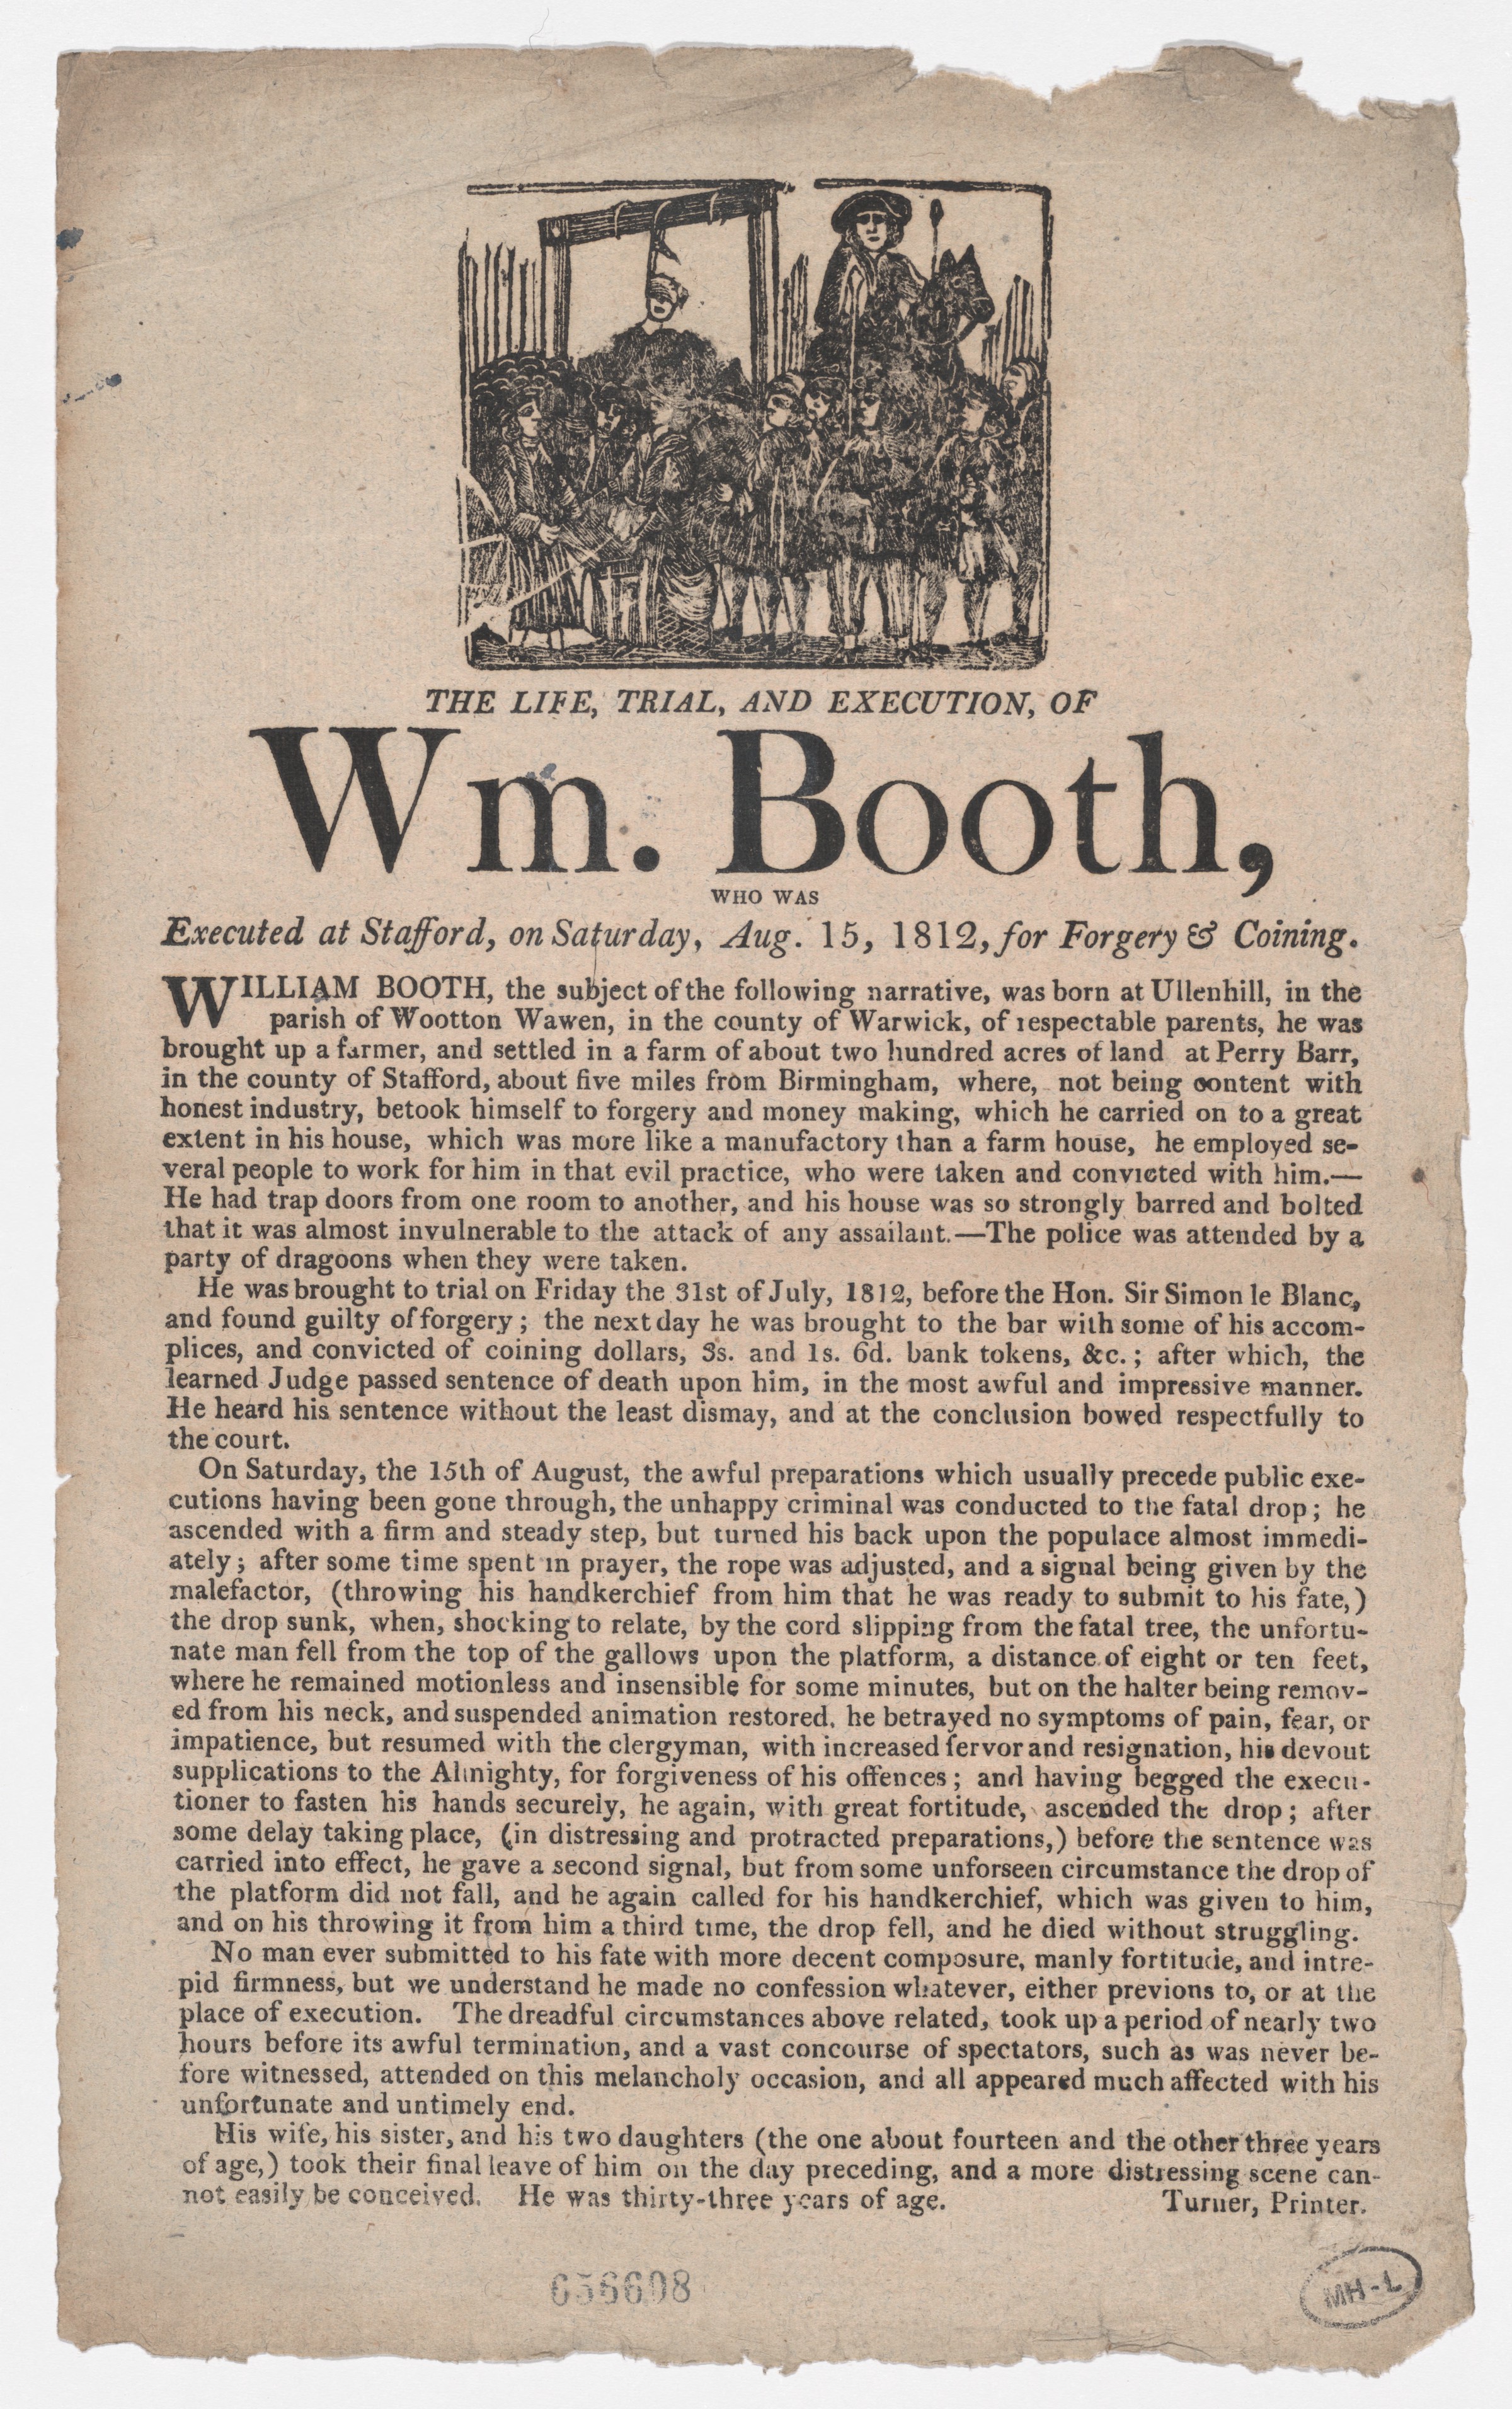 An image of a broadside from 1812.